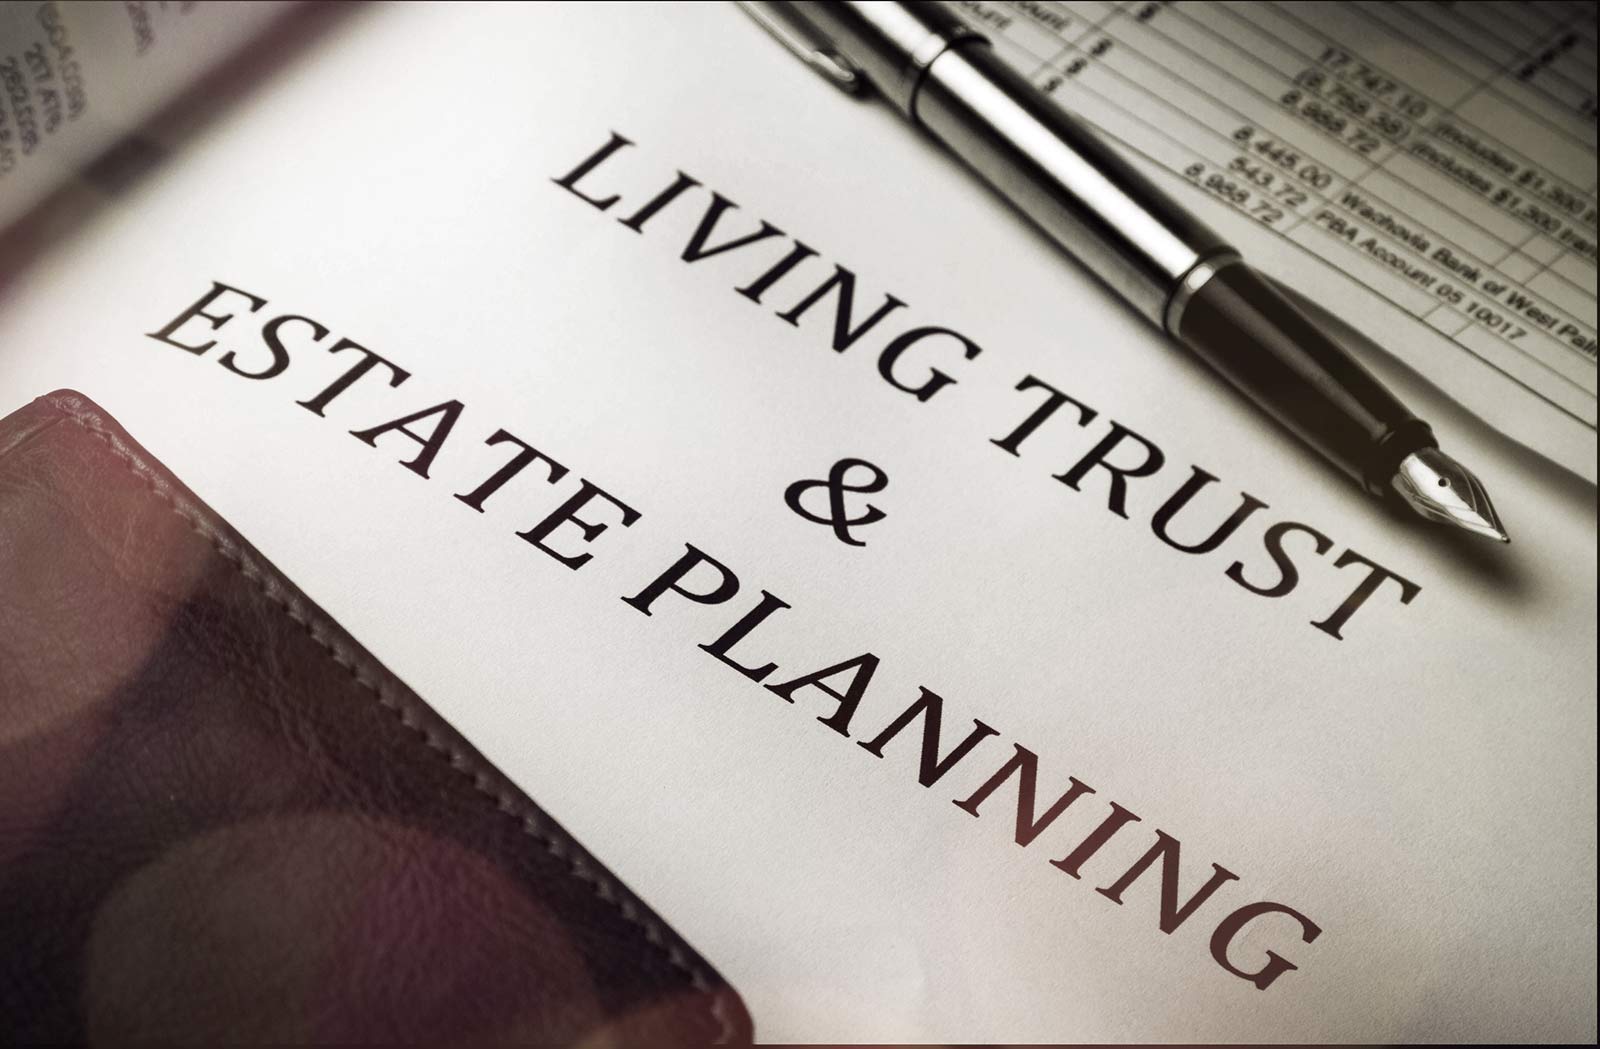 Estate Planning and Elder Law Attorney Services in Washington and Oregon by Walstead